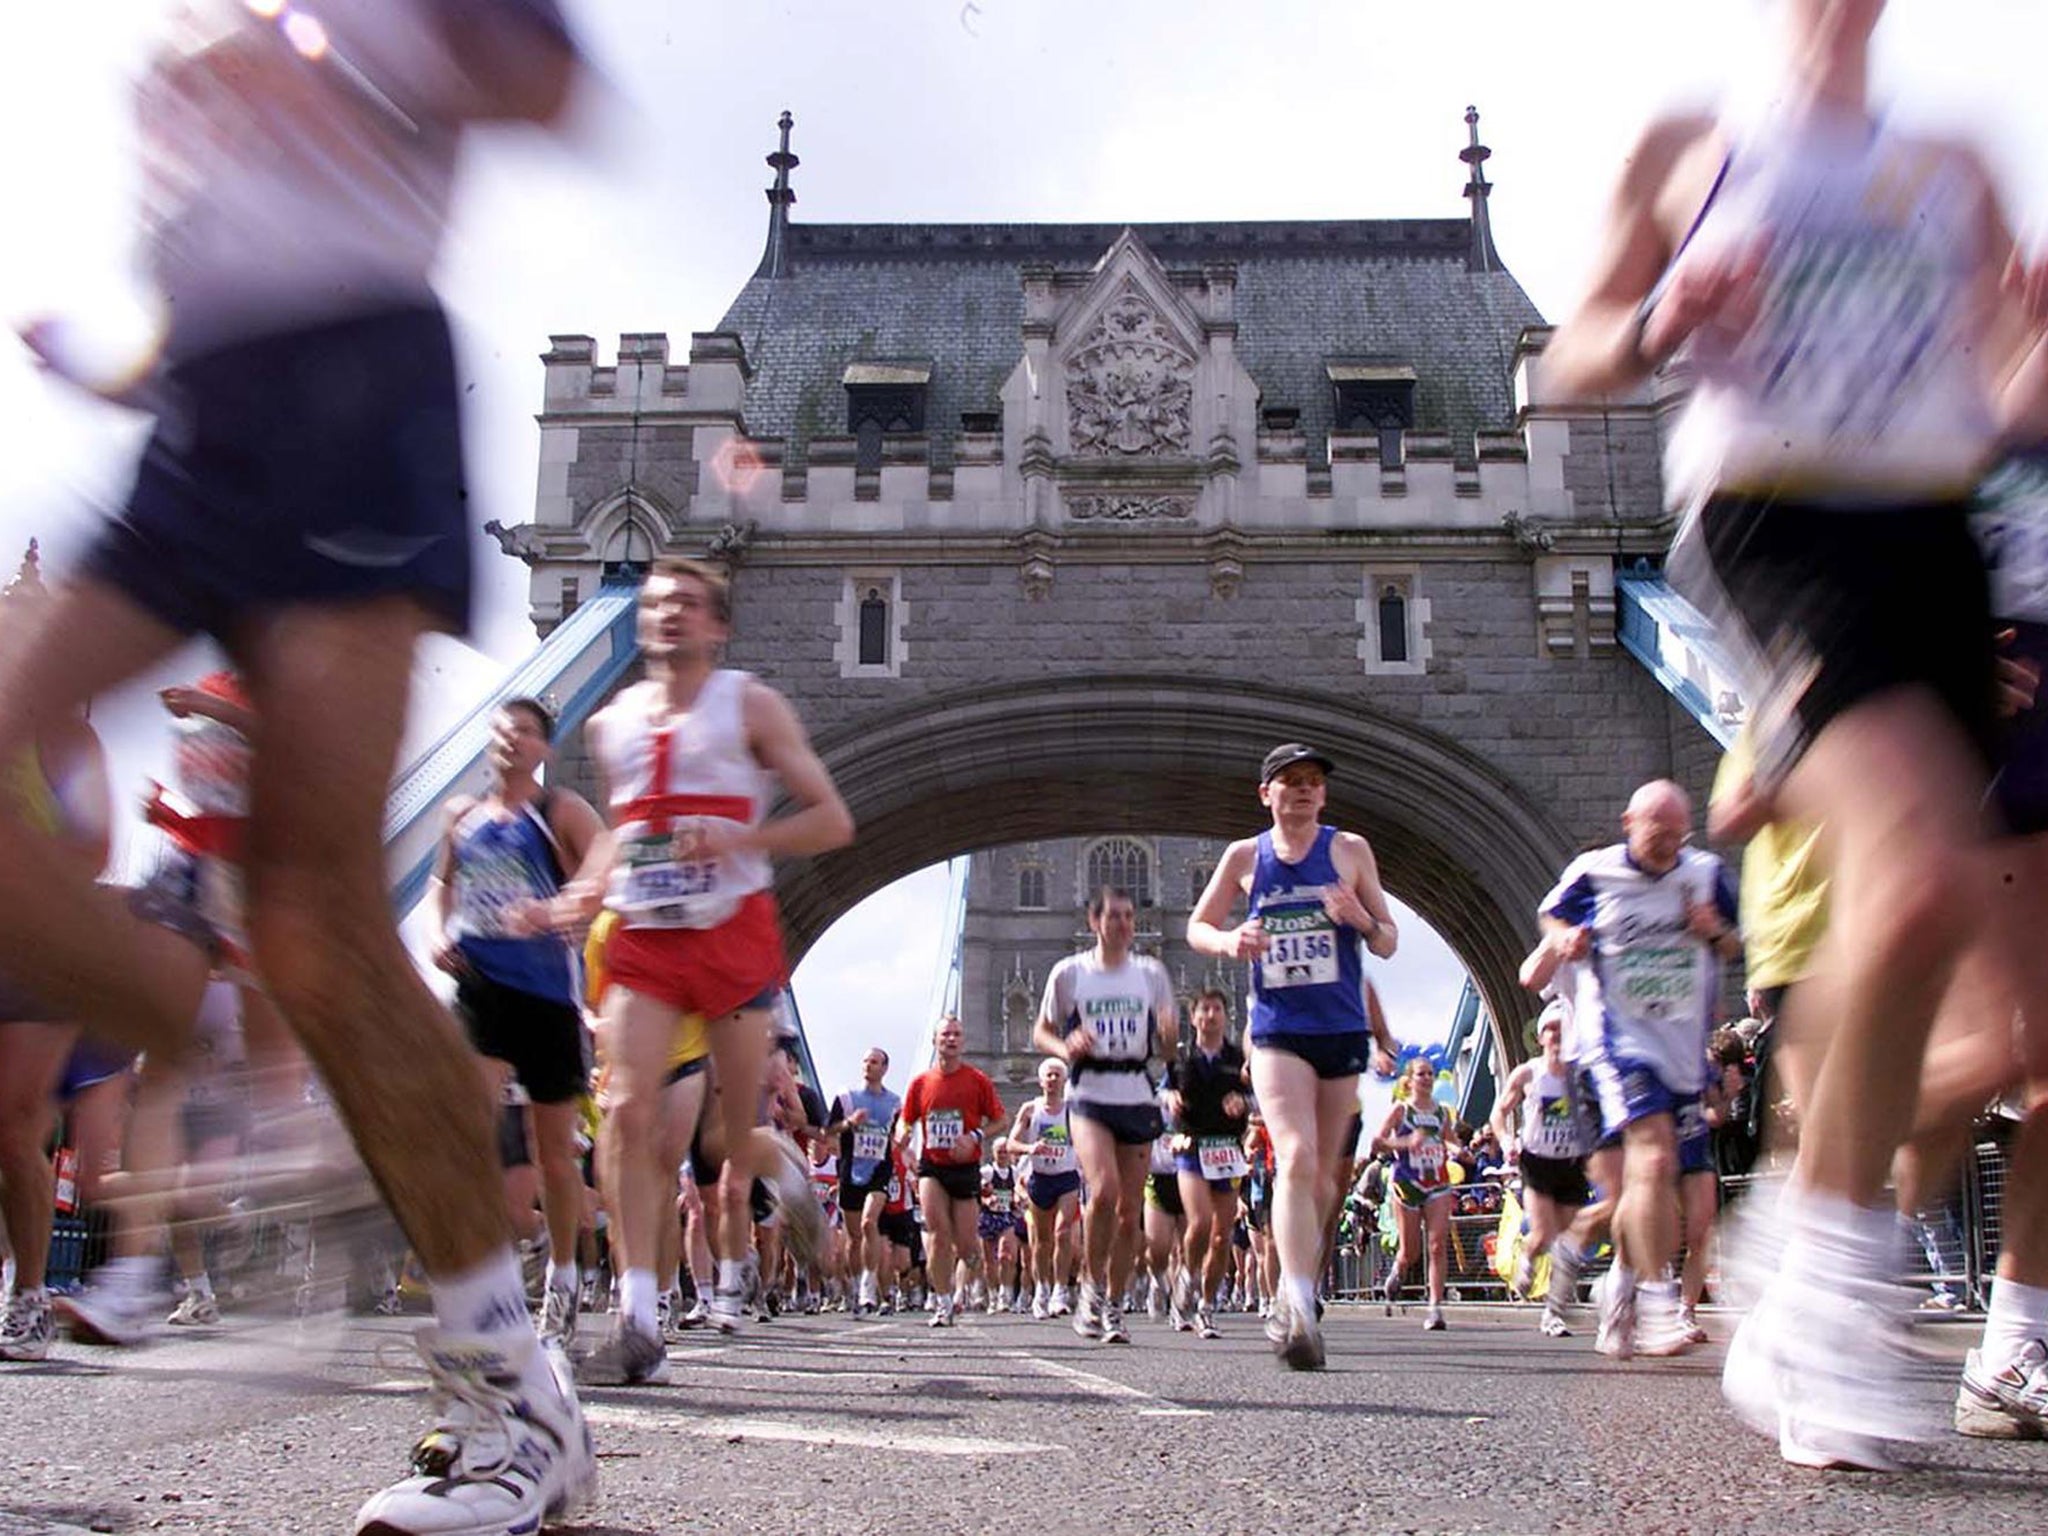 A record 37,300 racers will take part in today's marathon